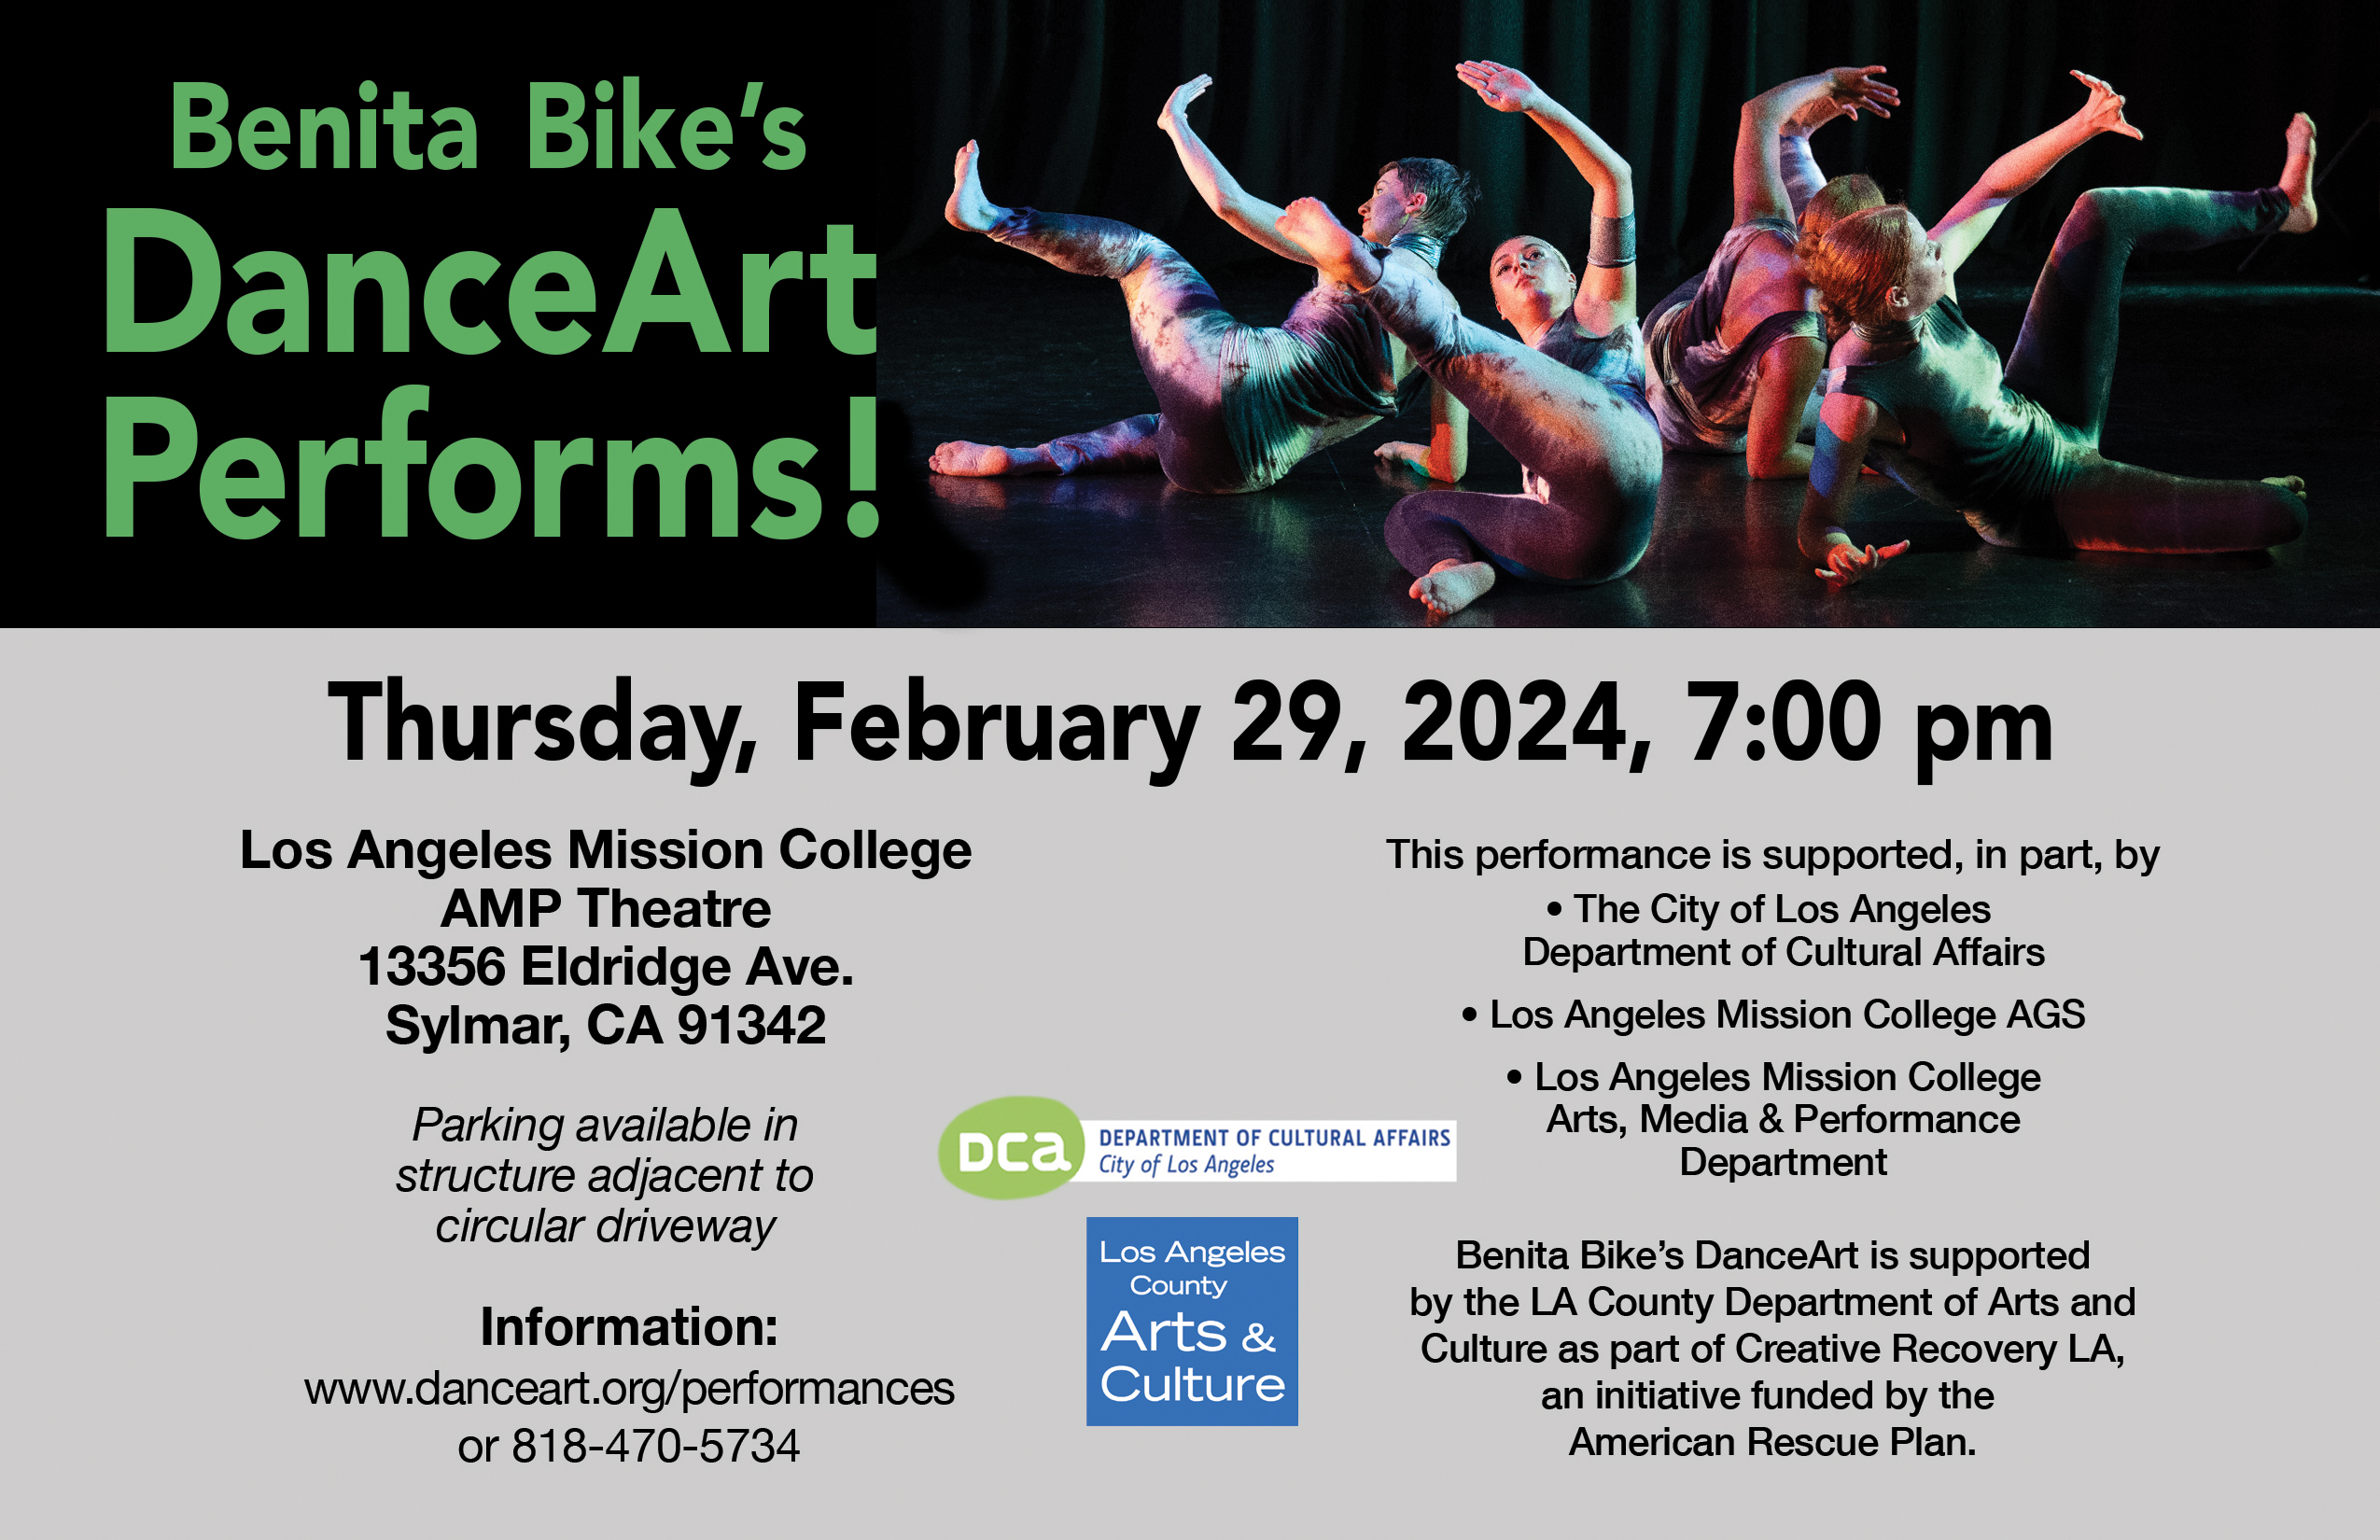 The image is a screenshot of text containing information about Benita Bike's DanceArt performance in Los Angeles on Thursday, February 29, 2024, at 7:00 pm. The performance is supported by AMP Theatre, the City of Los Angeles Department of Cultural Affairs, and the LA County Department of Arts and Culture. For more information, visit www.danceart.org/performances or contact 818-470-5734.